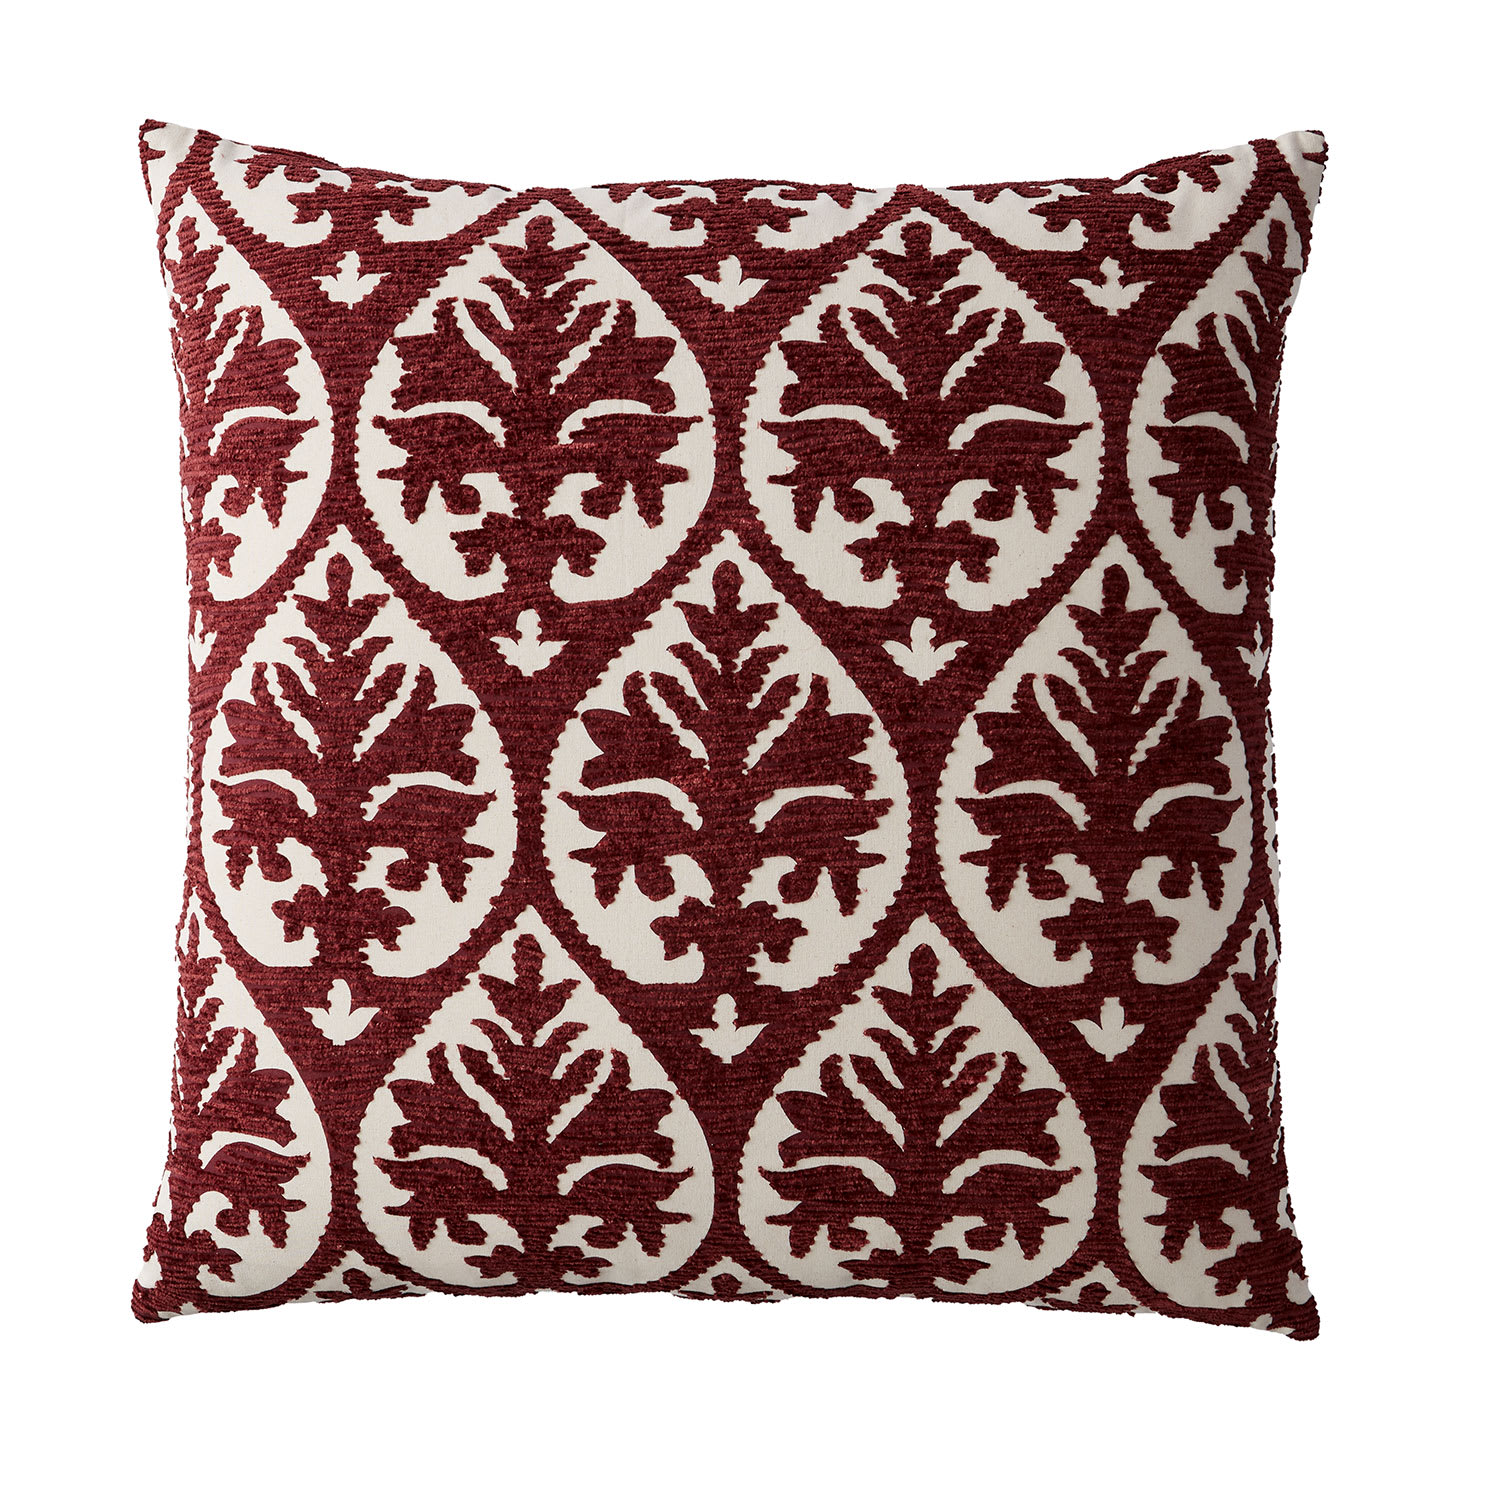 Red Multicolored Damask Embroidered Pillow Cover - Damask